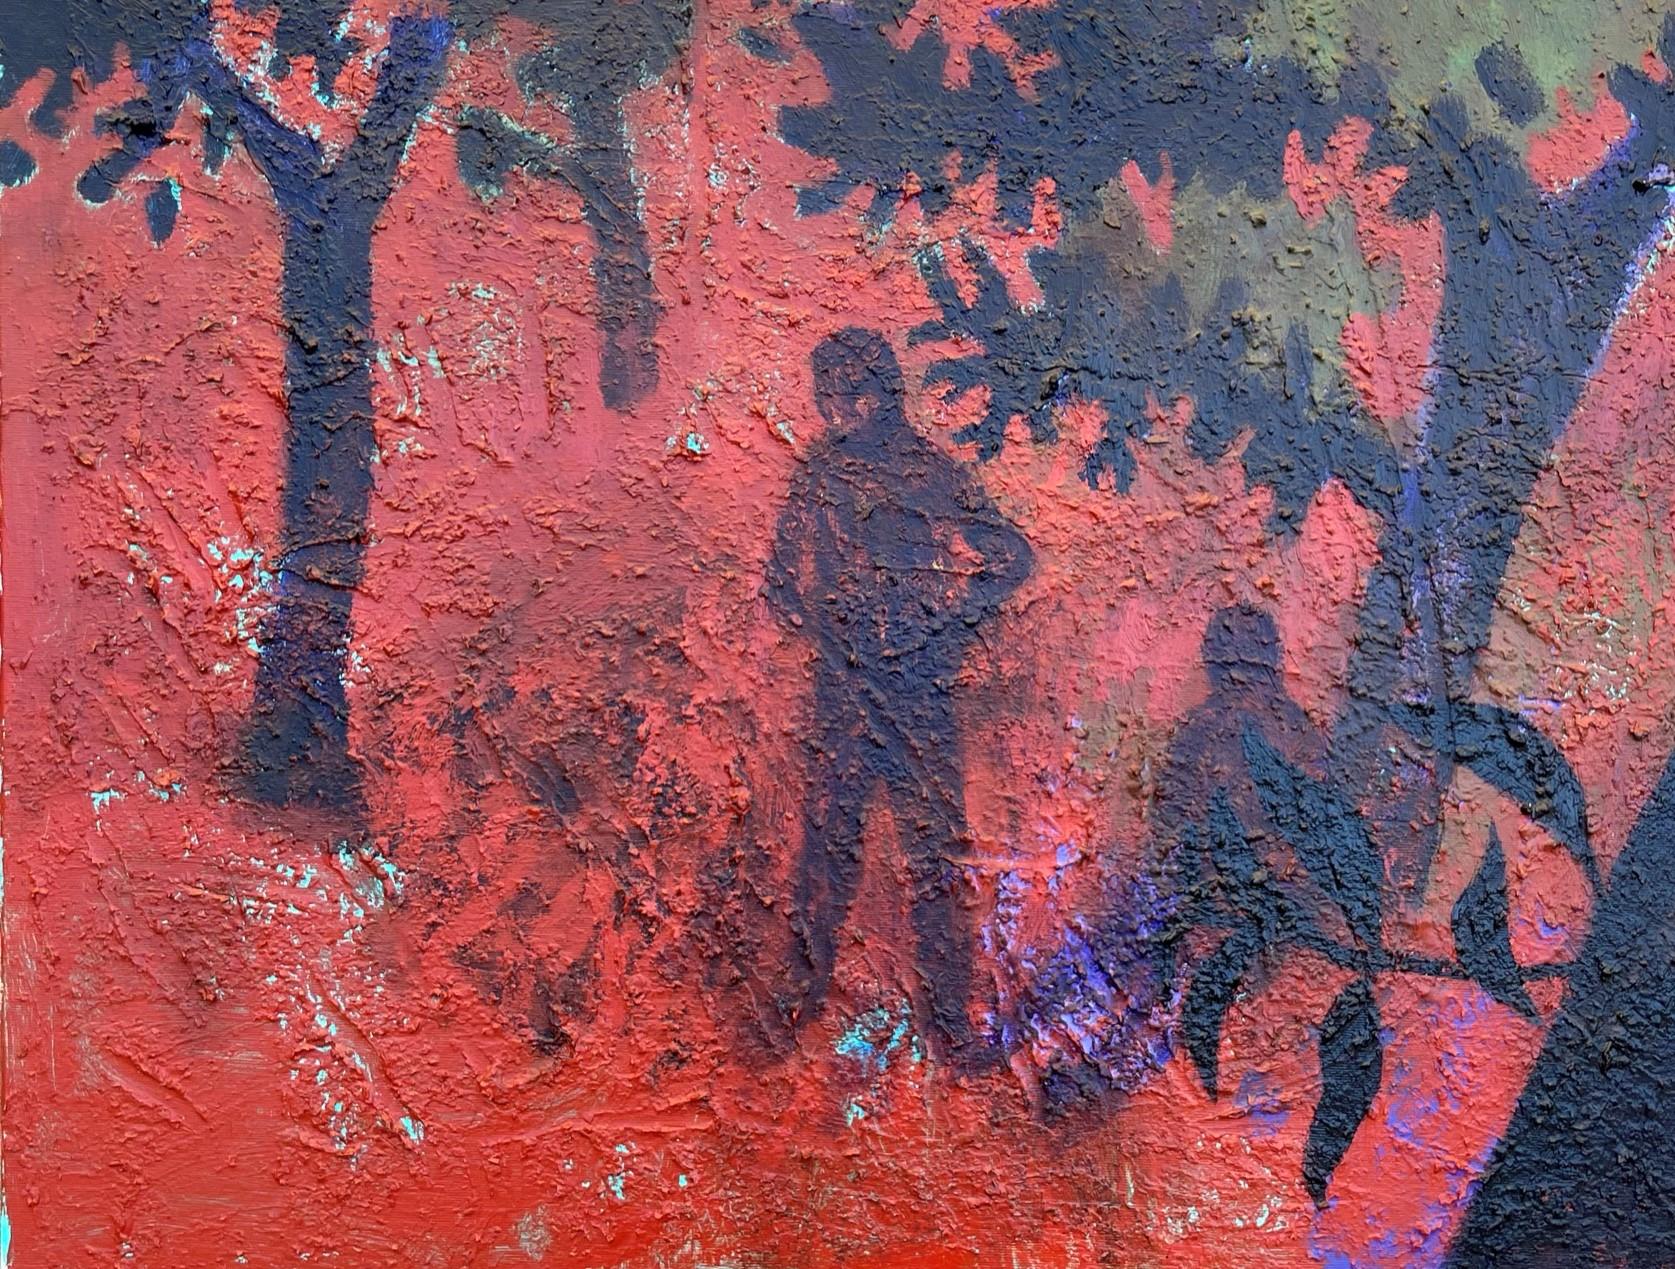 Lovers in an Orchard - Contemporary Art, Red, Nature, Couple, 21st Century - Gray Figurative Painting by Alexandru Rădvan